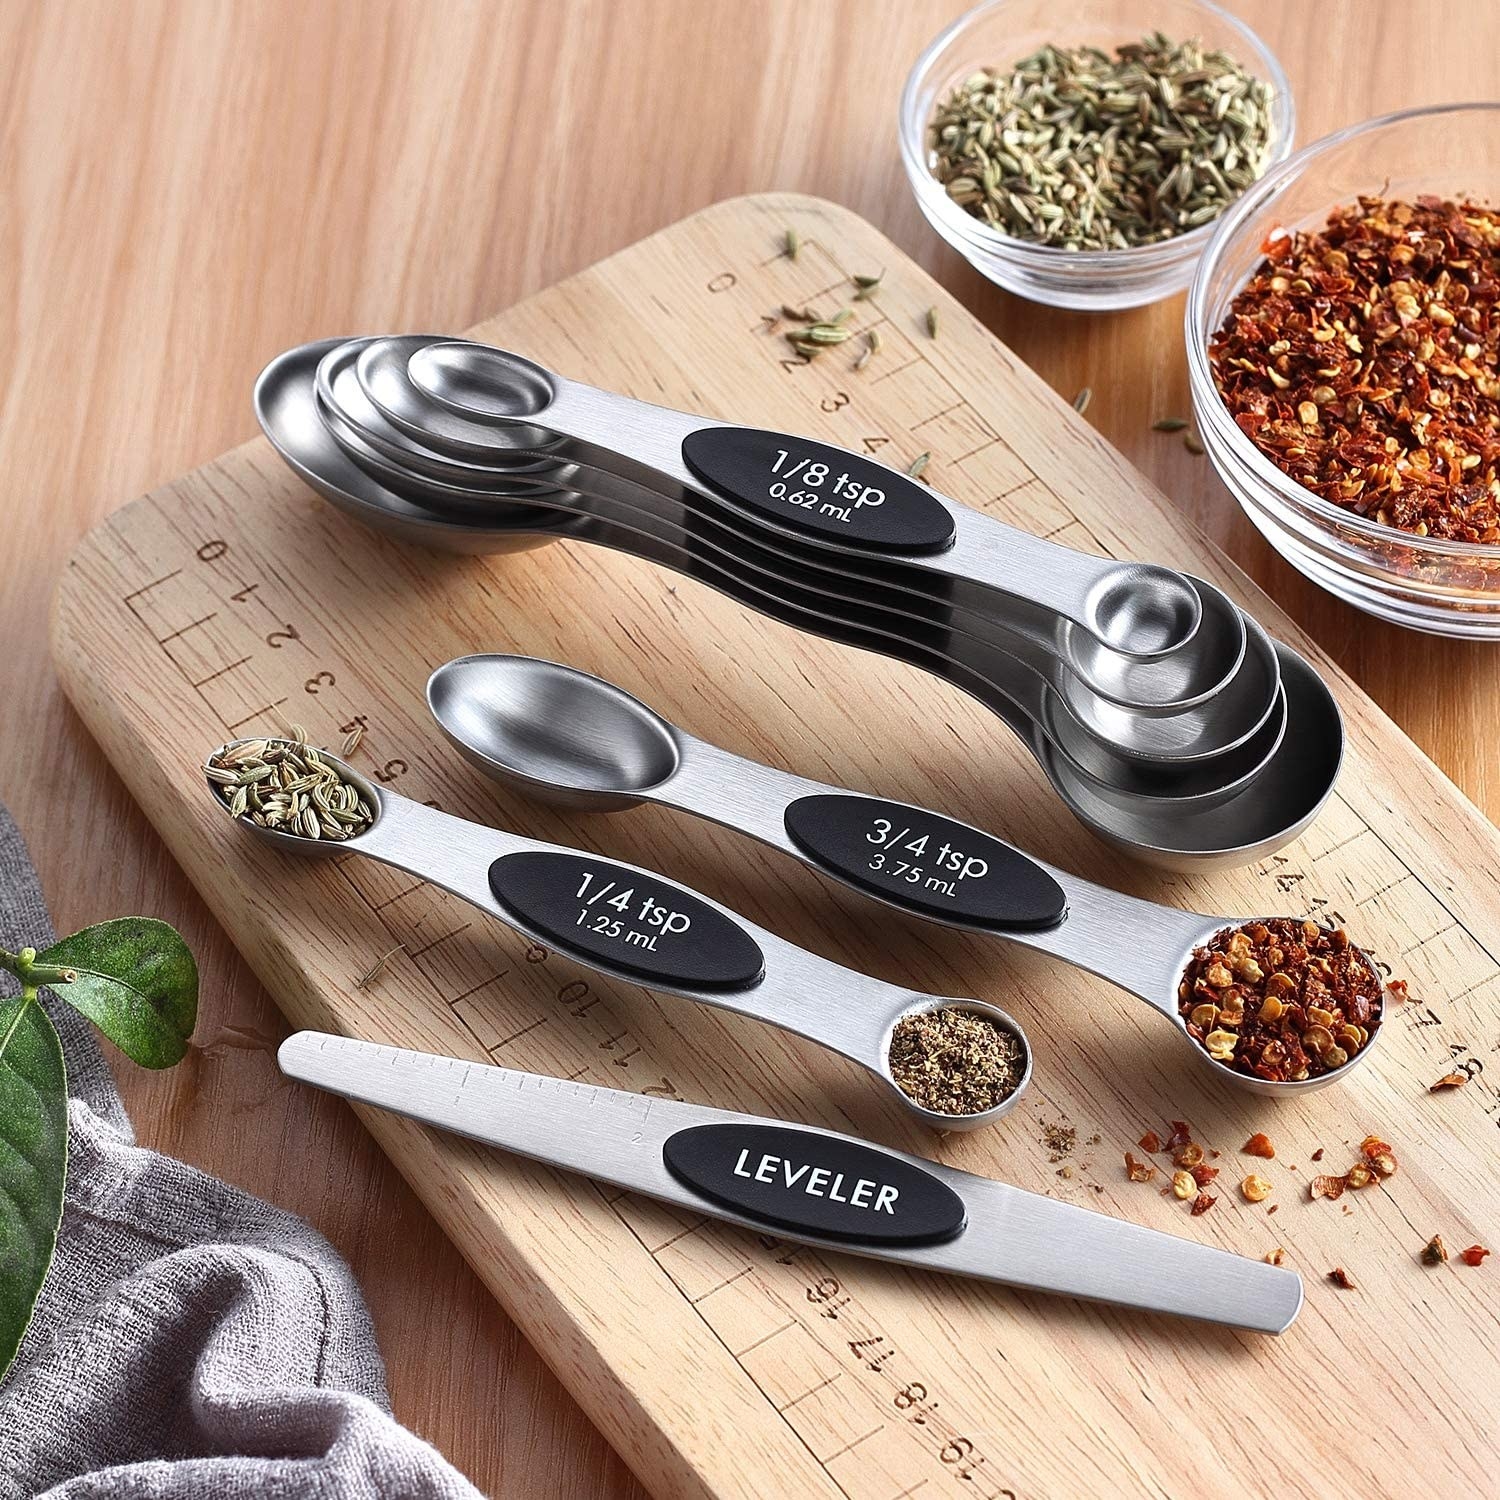 the measuring spoons being used to measure out spices 